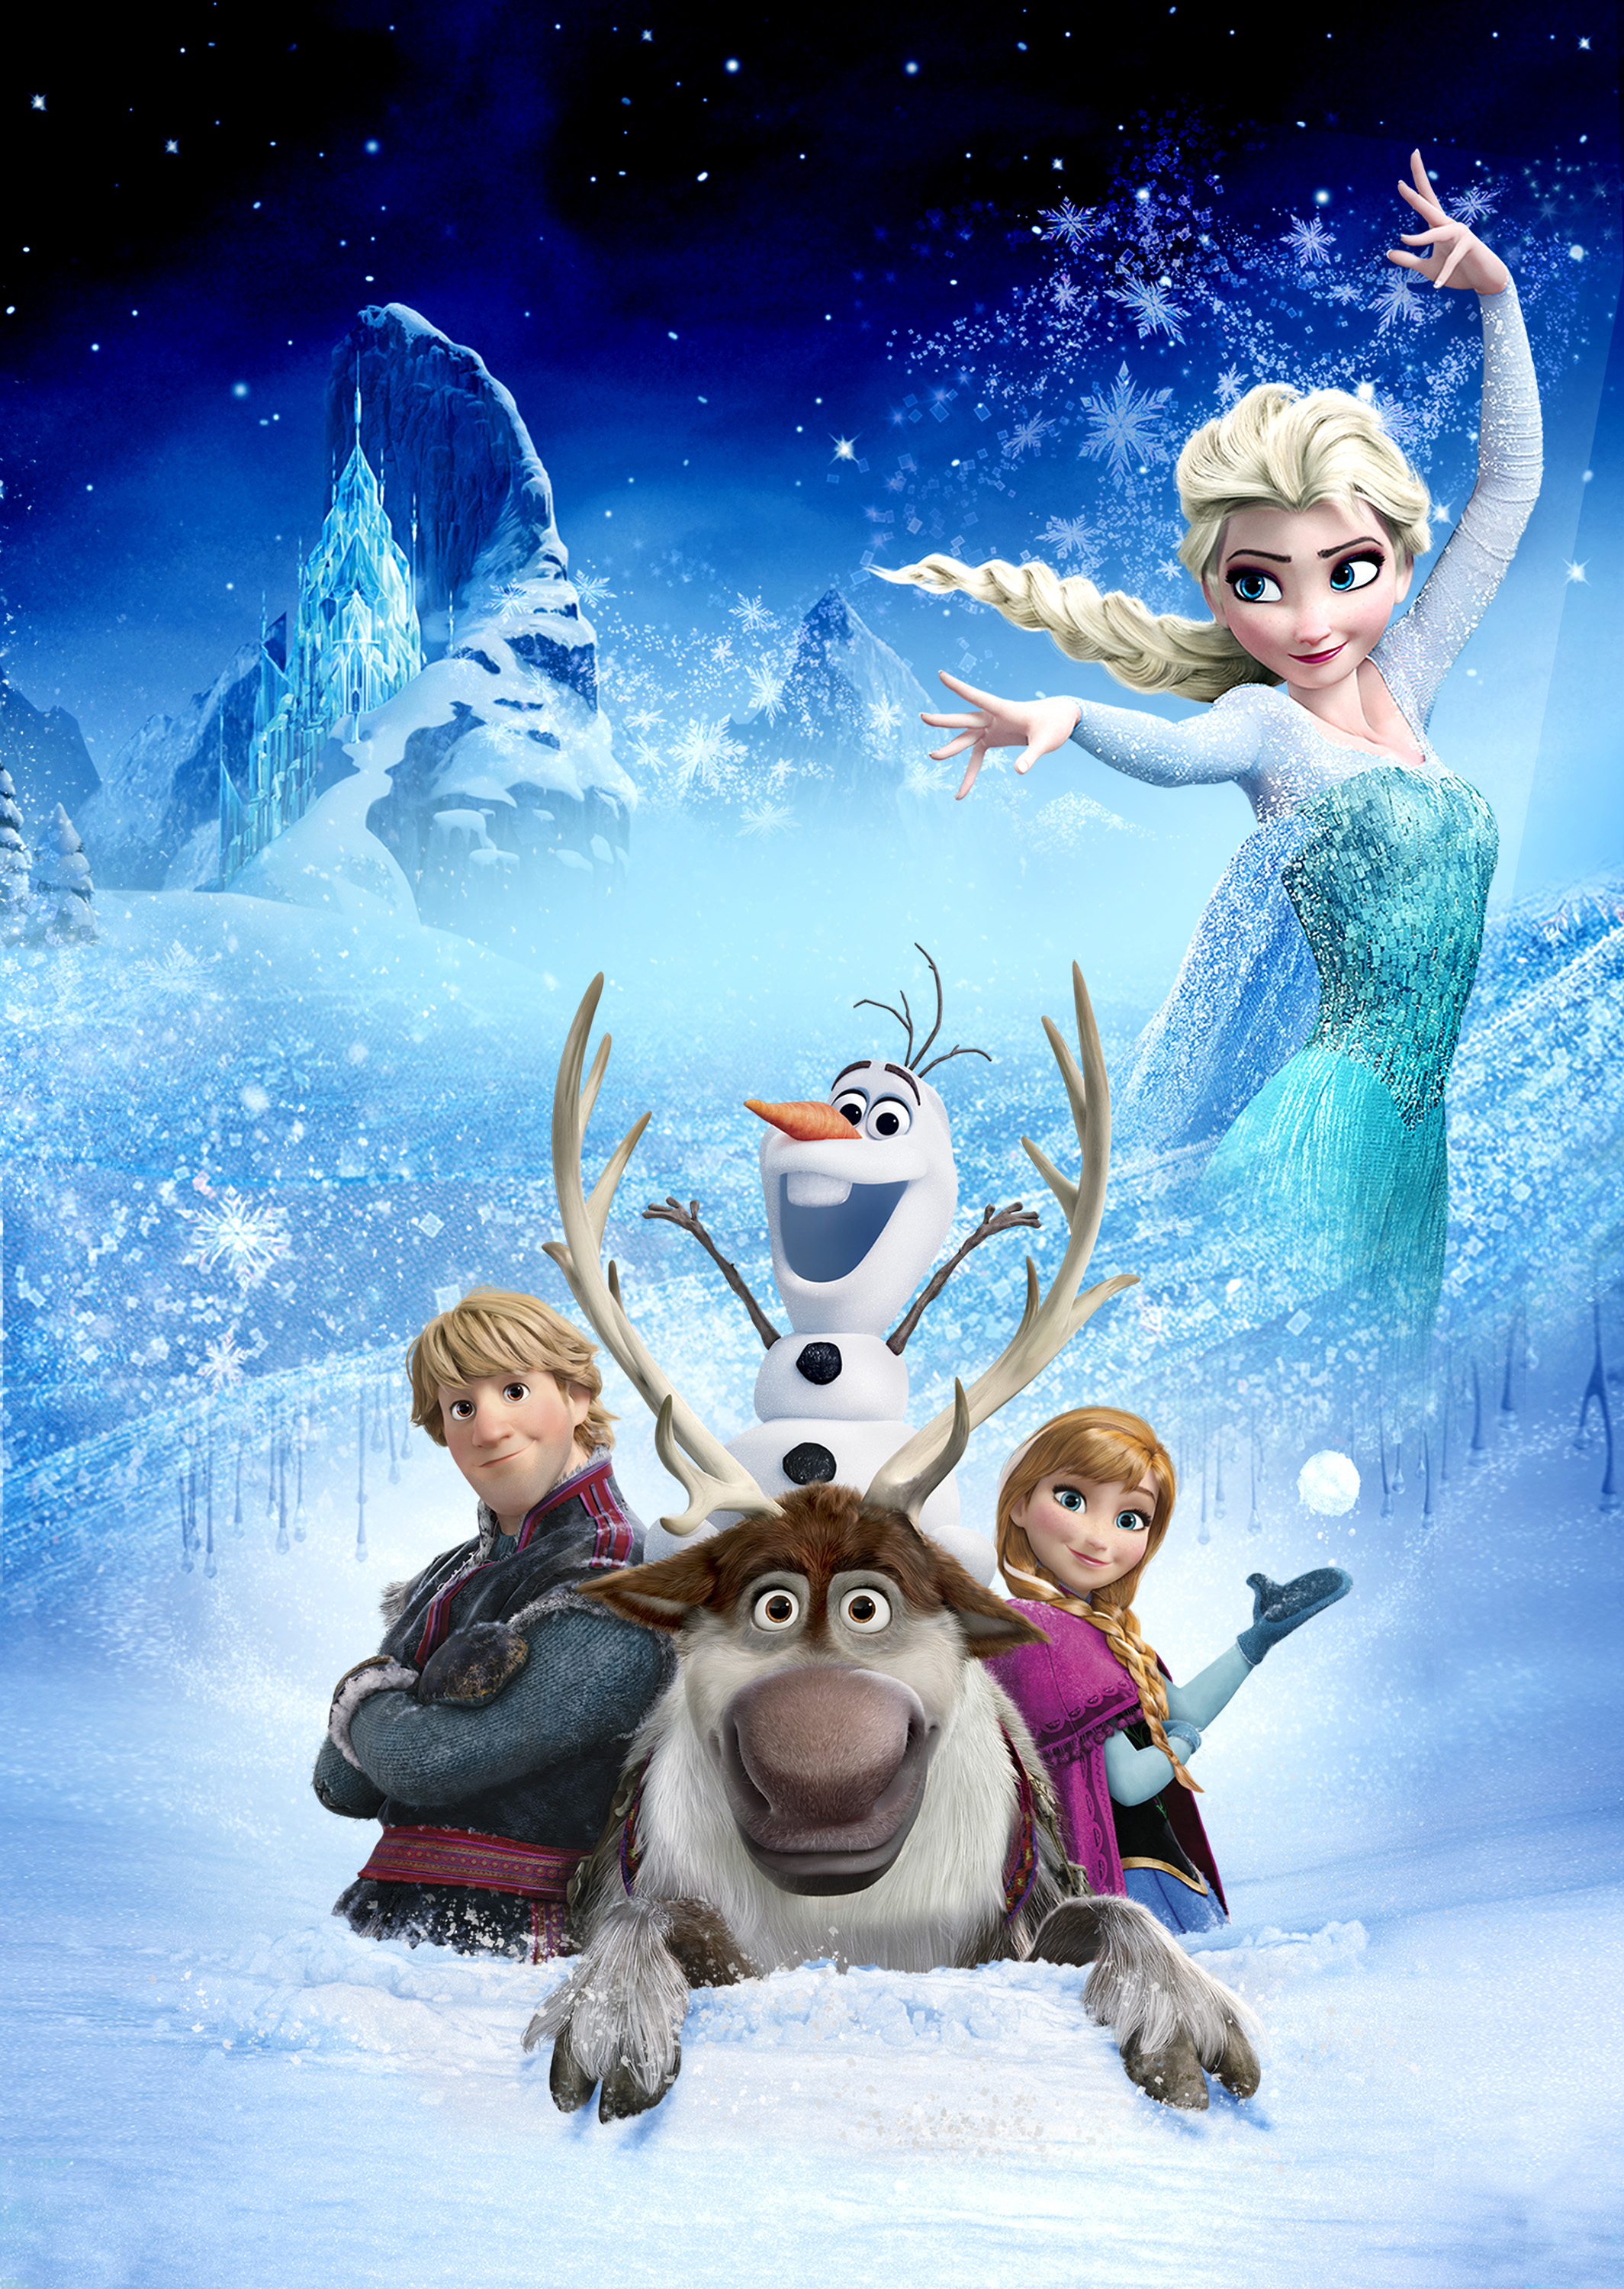 Frozen Is Coming to ABC Sunday, December 10! | ABC Updates